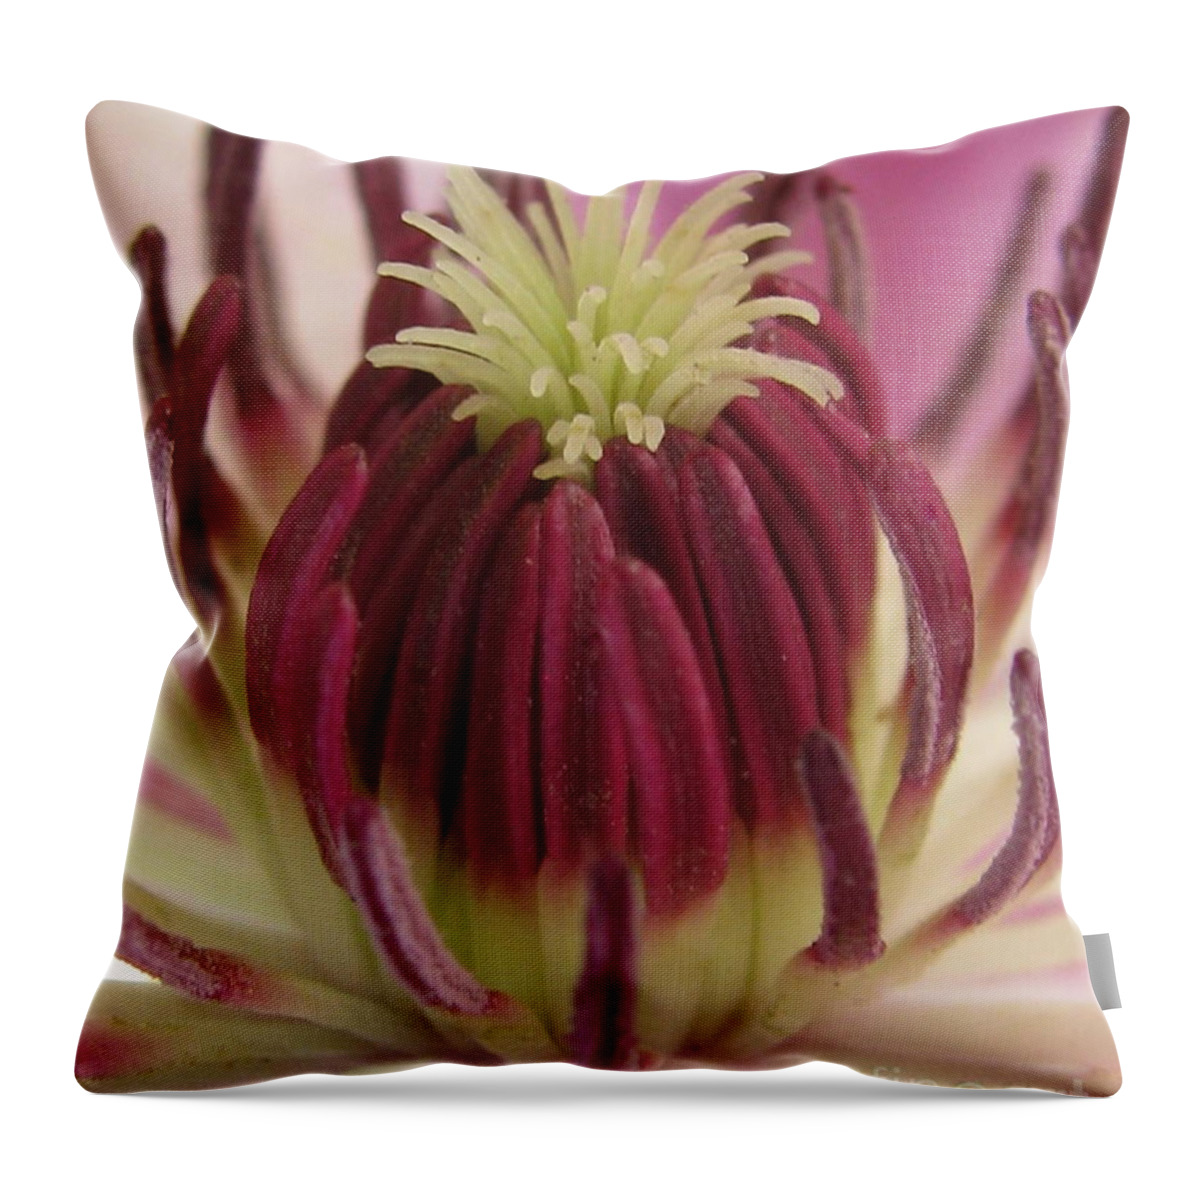 Flower Throw Pillow featuring the photograph Freshness Photography by Tina Marie